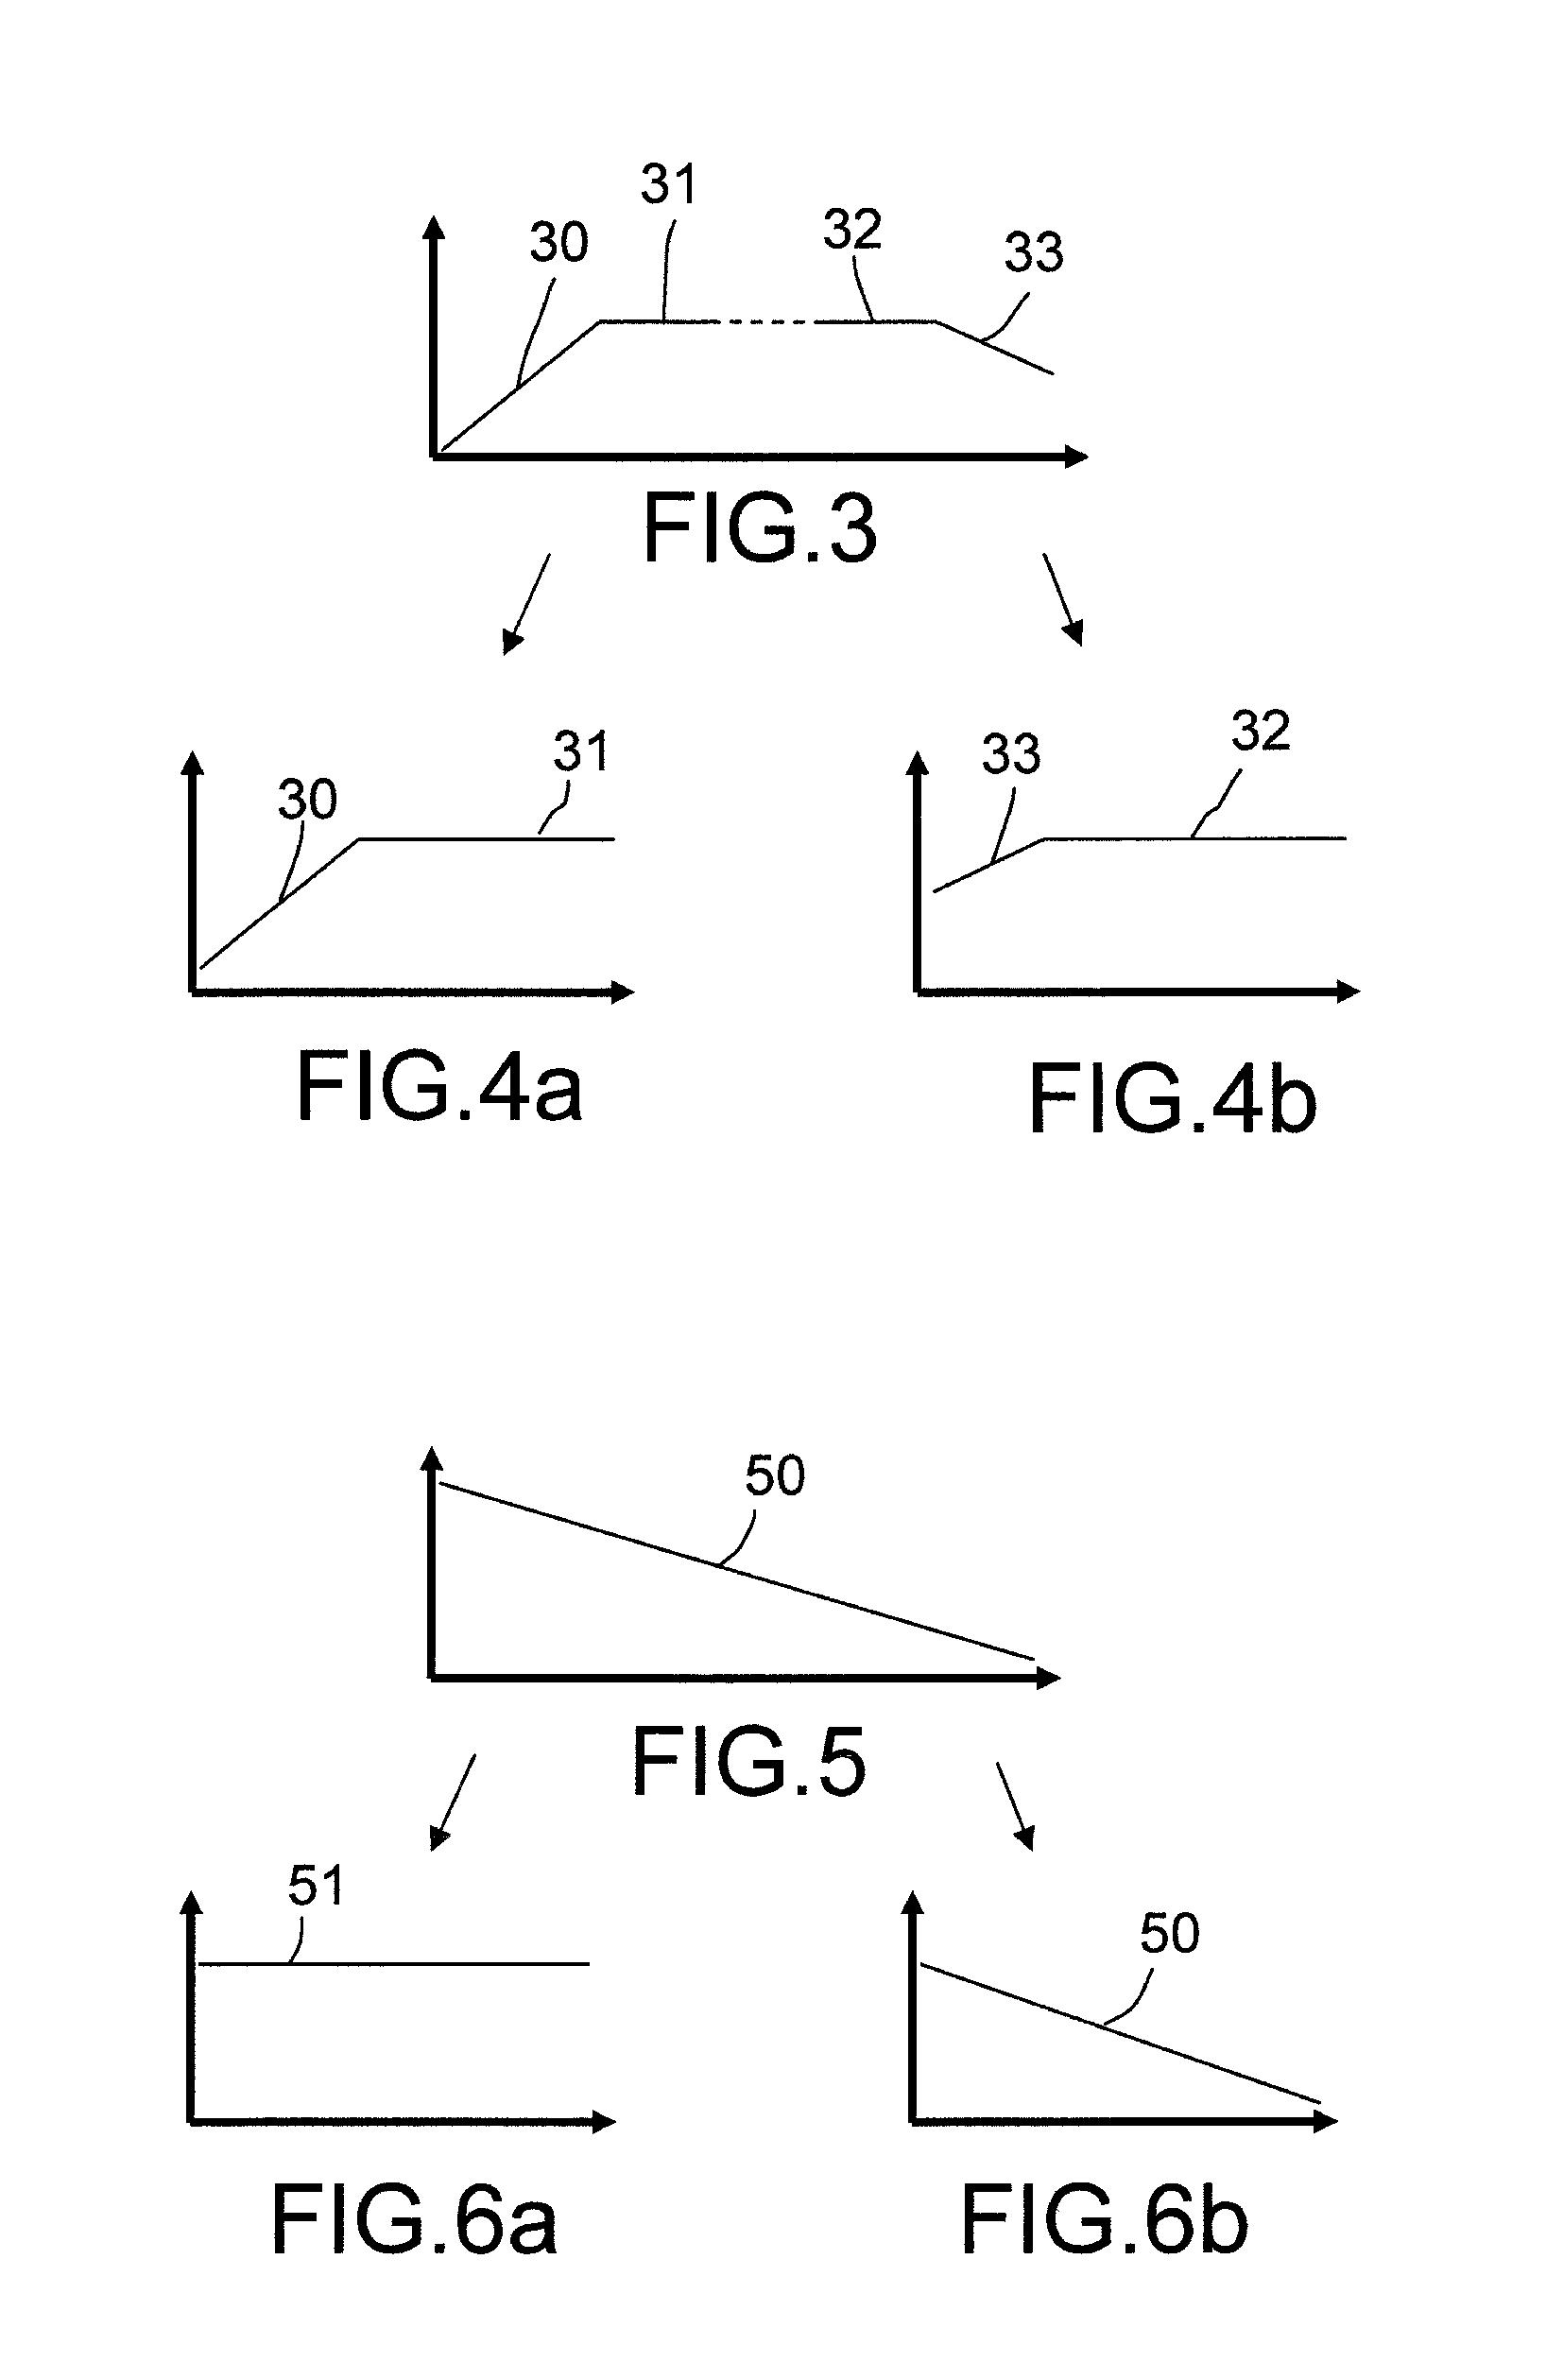 Method for determining the horizontal profile of a flight plan complying with a prescribed vertical flight profile